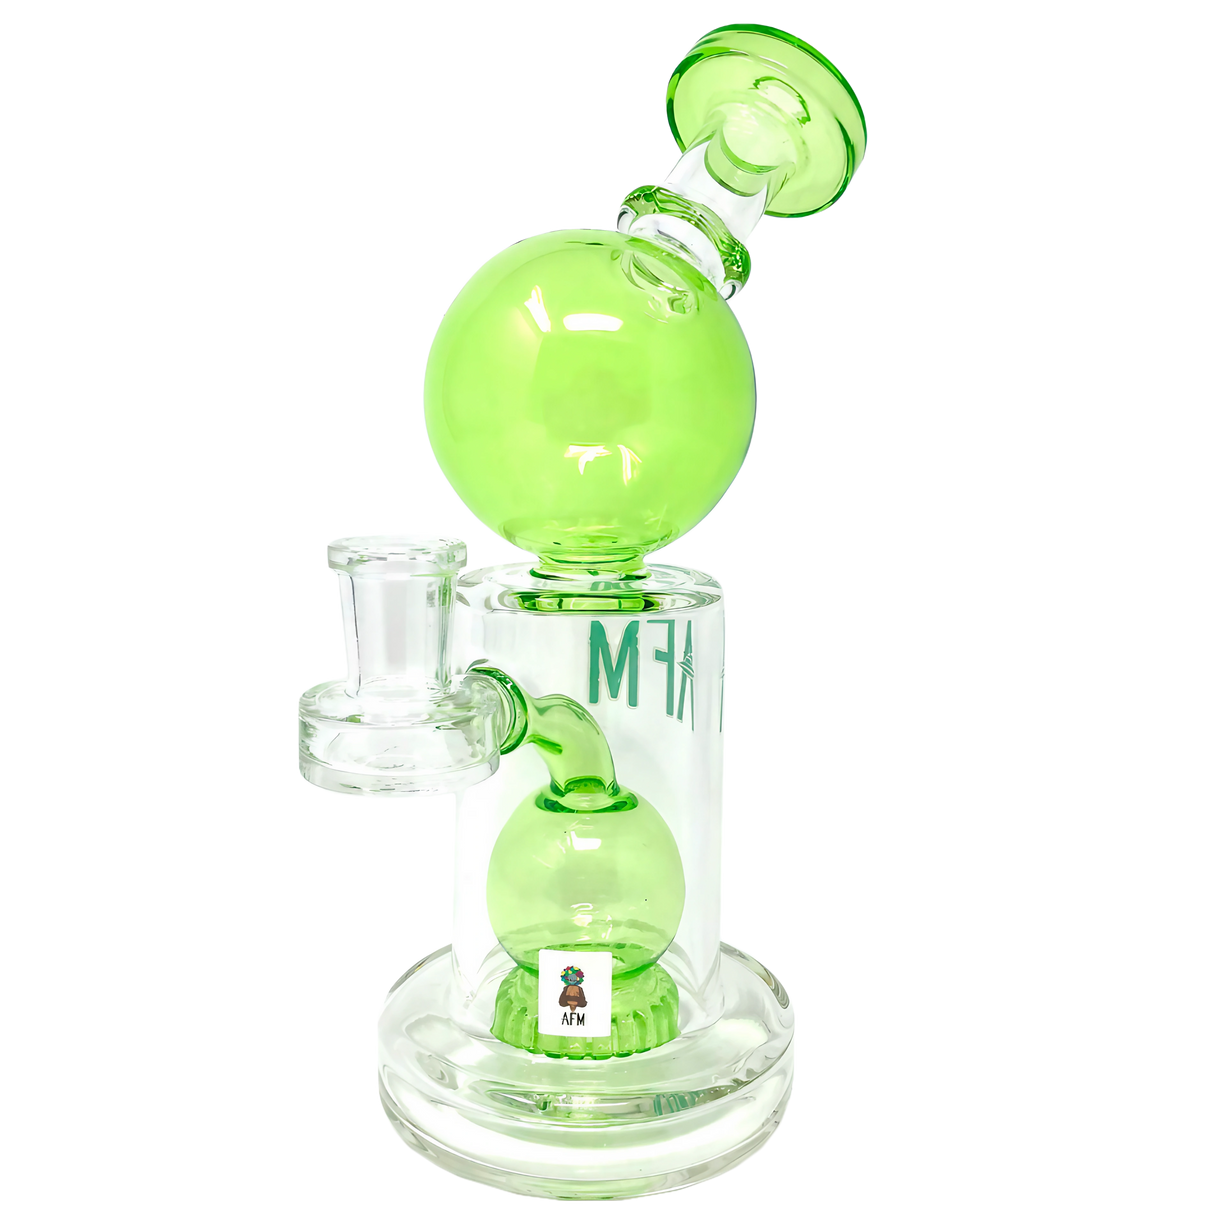 AFM Bubble Head Banger Hanger Dab Rig with Showerhead Percolator, 14mm Joint, 8" Tall - Front View